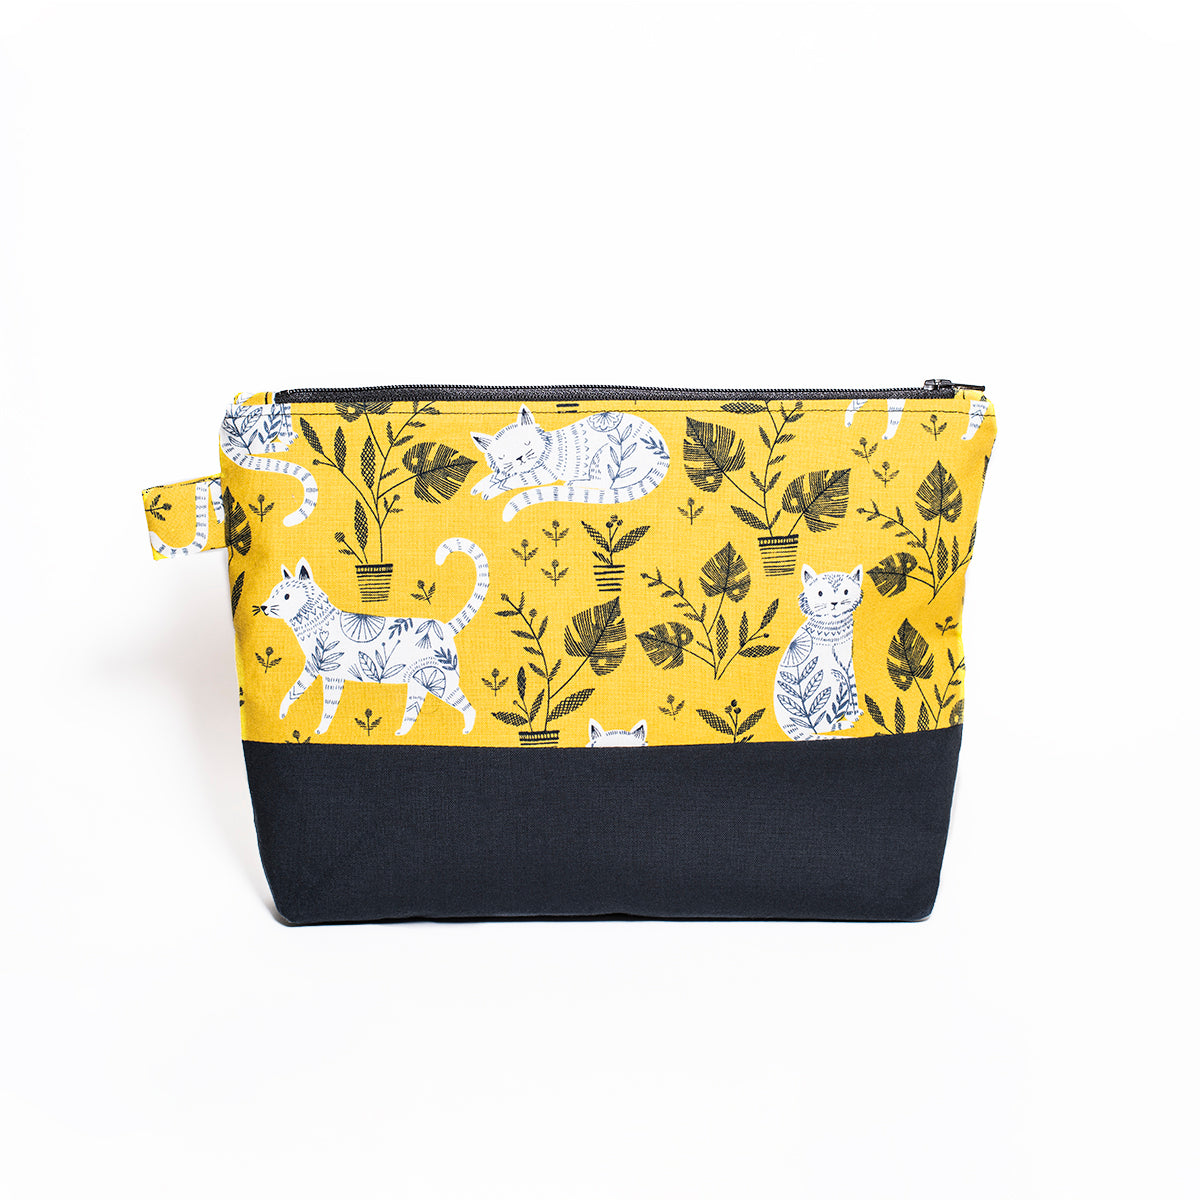 100% cotton zip case in yellow and black featuring various illustrations of white cats and house plants in black